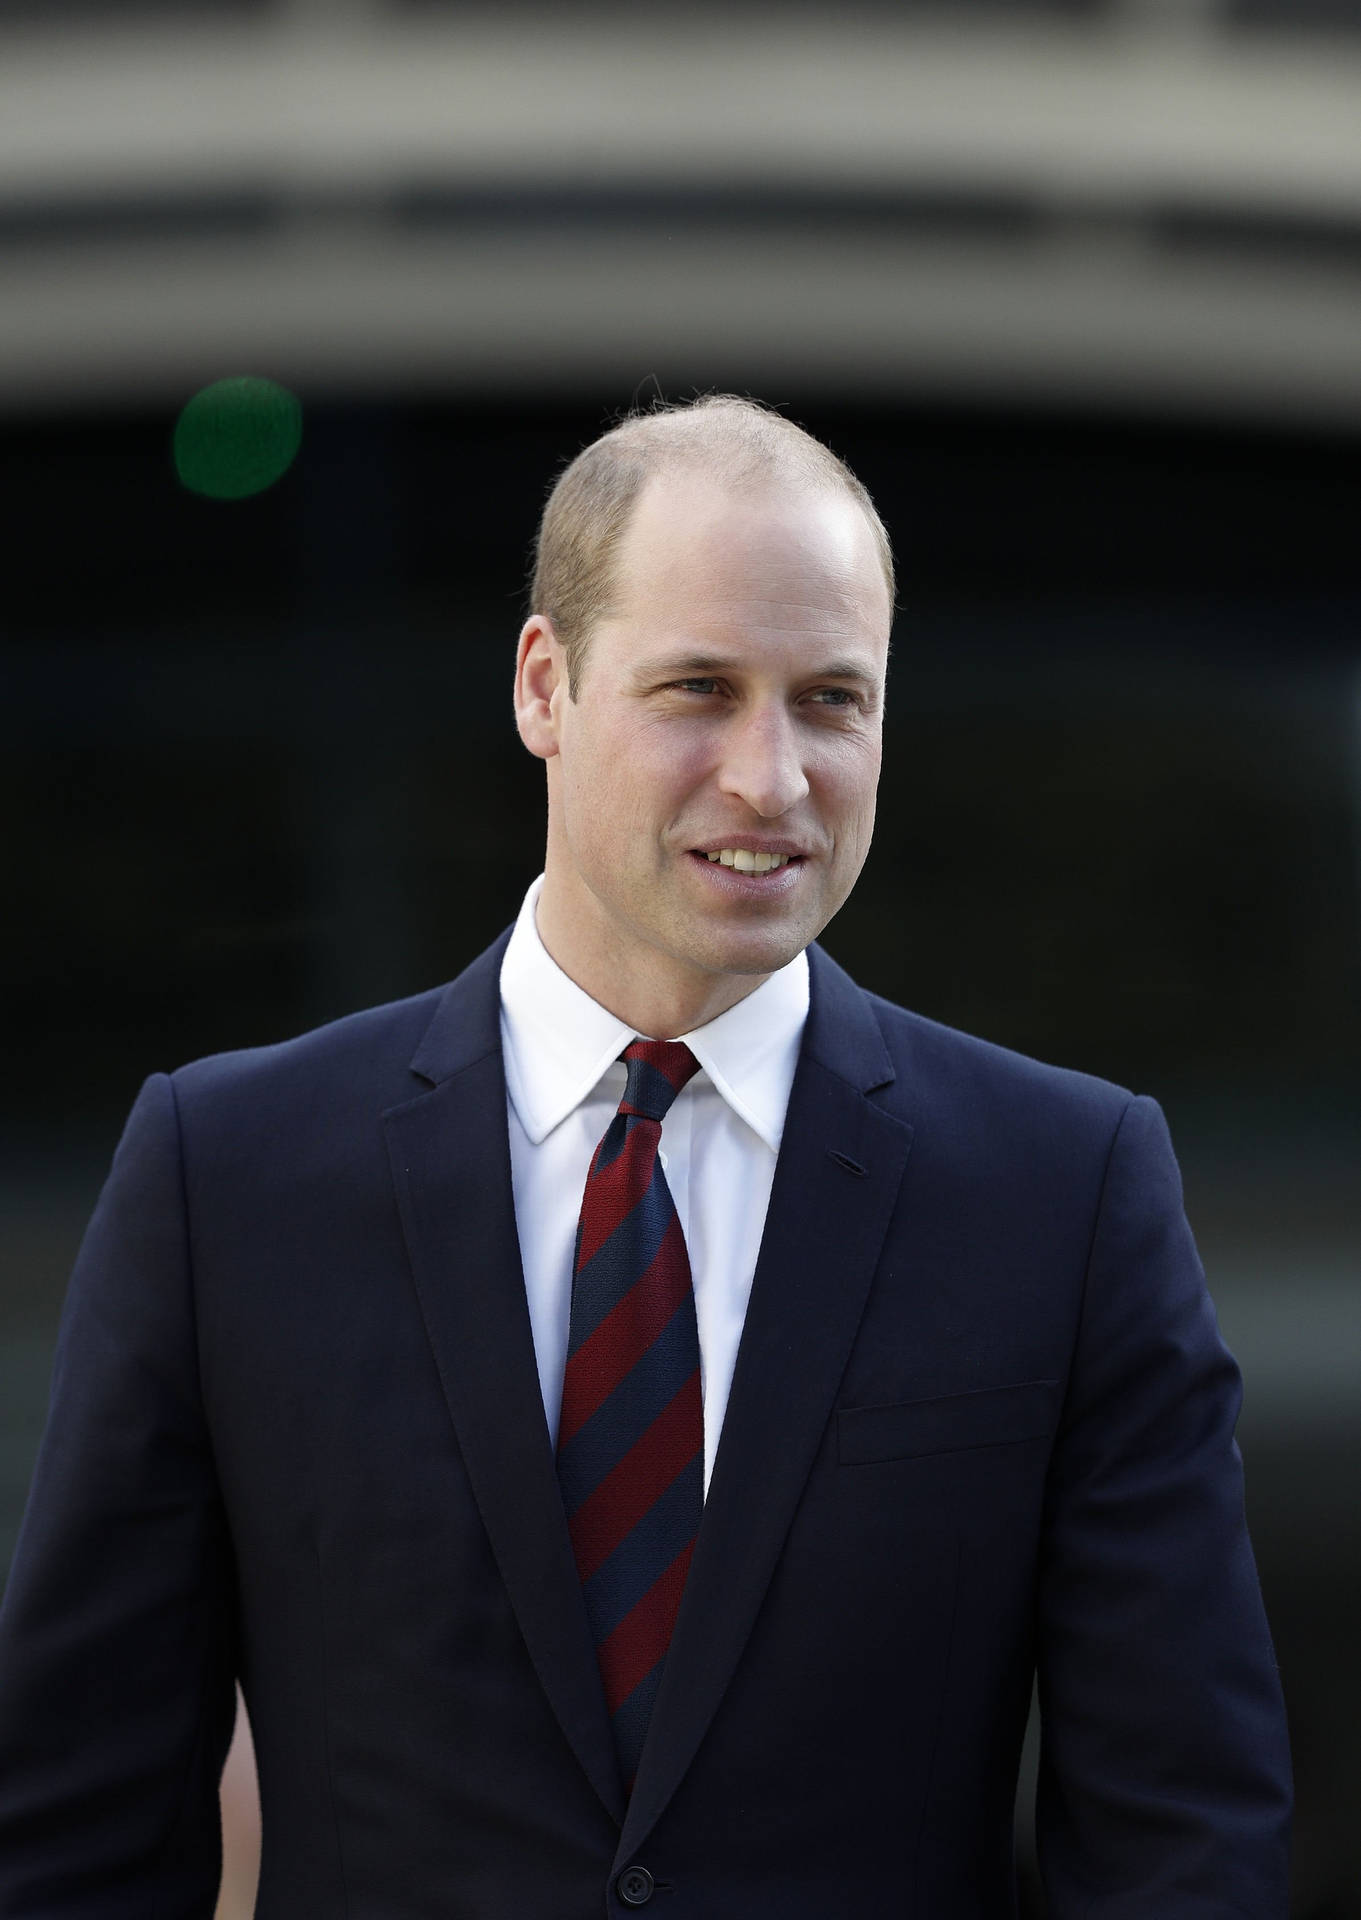 Prince William Wearing Suit And Tie Wallpaper